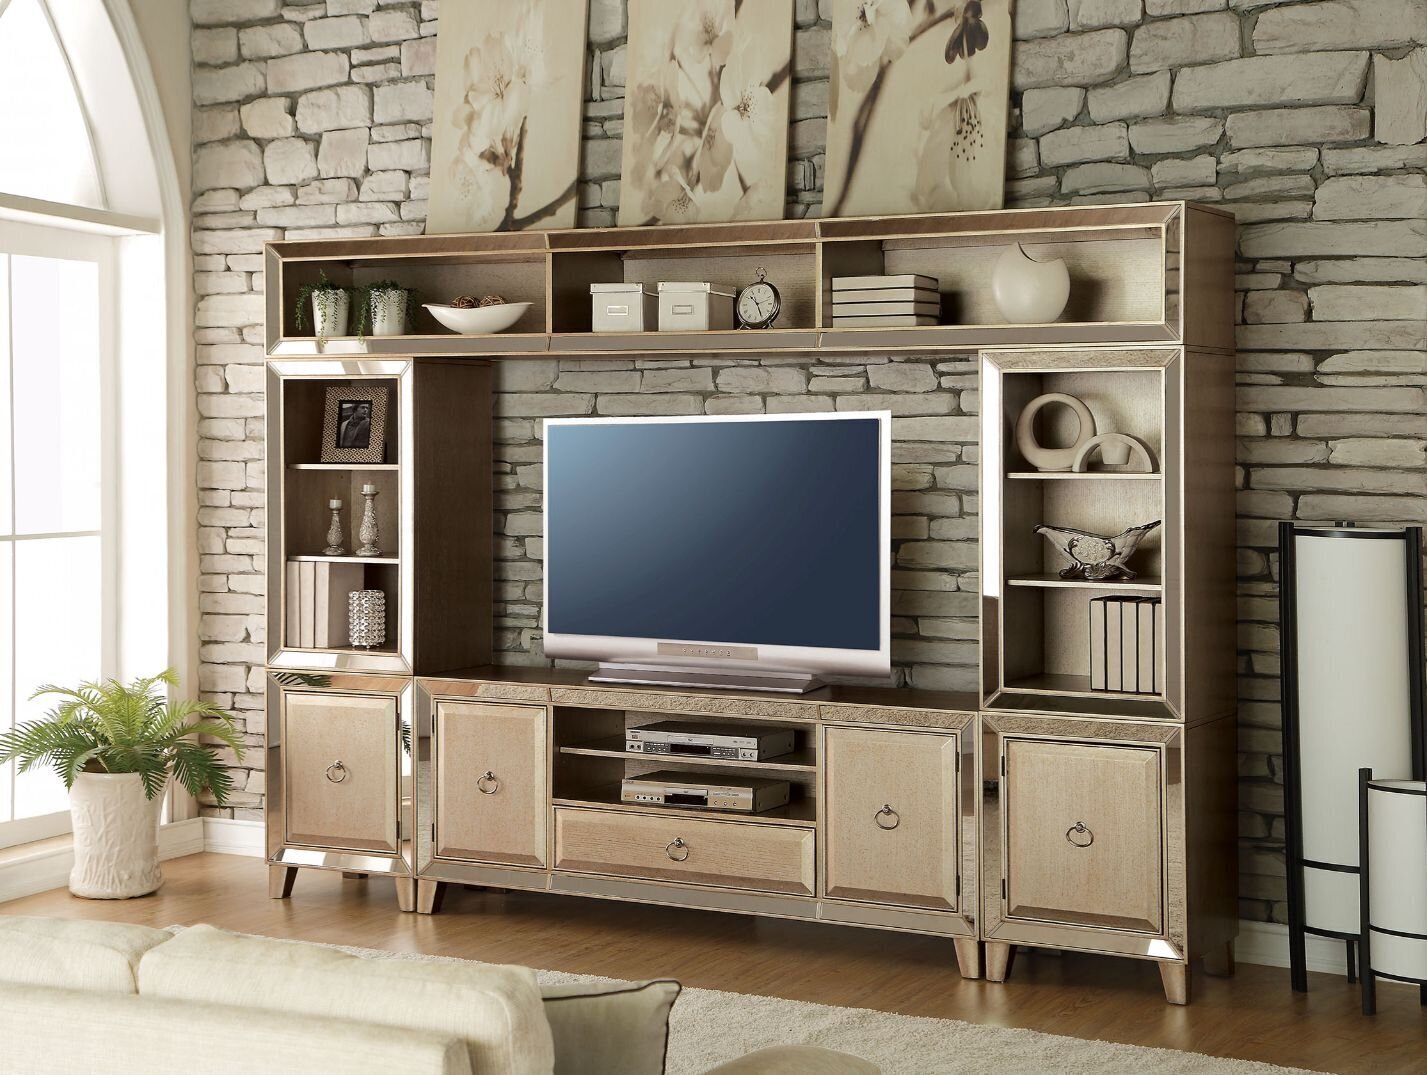 Reflective Entertainment Wall Unit on Legs